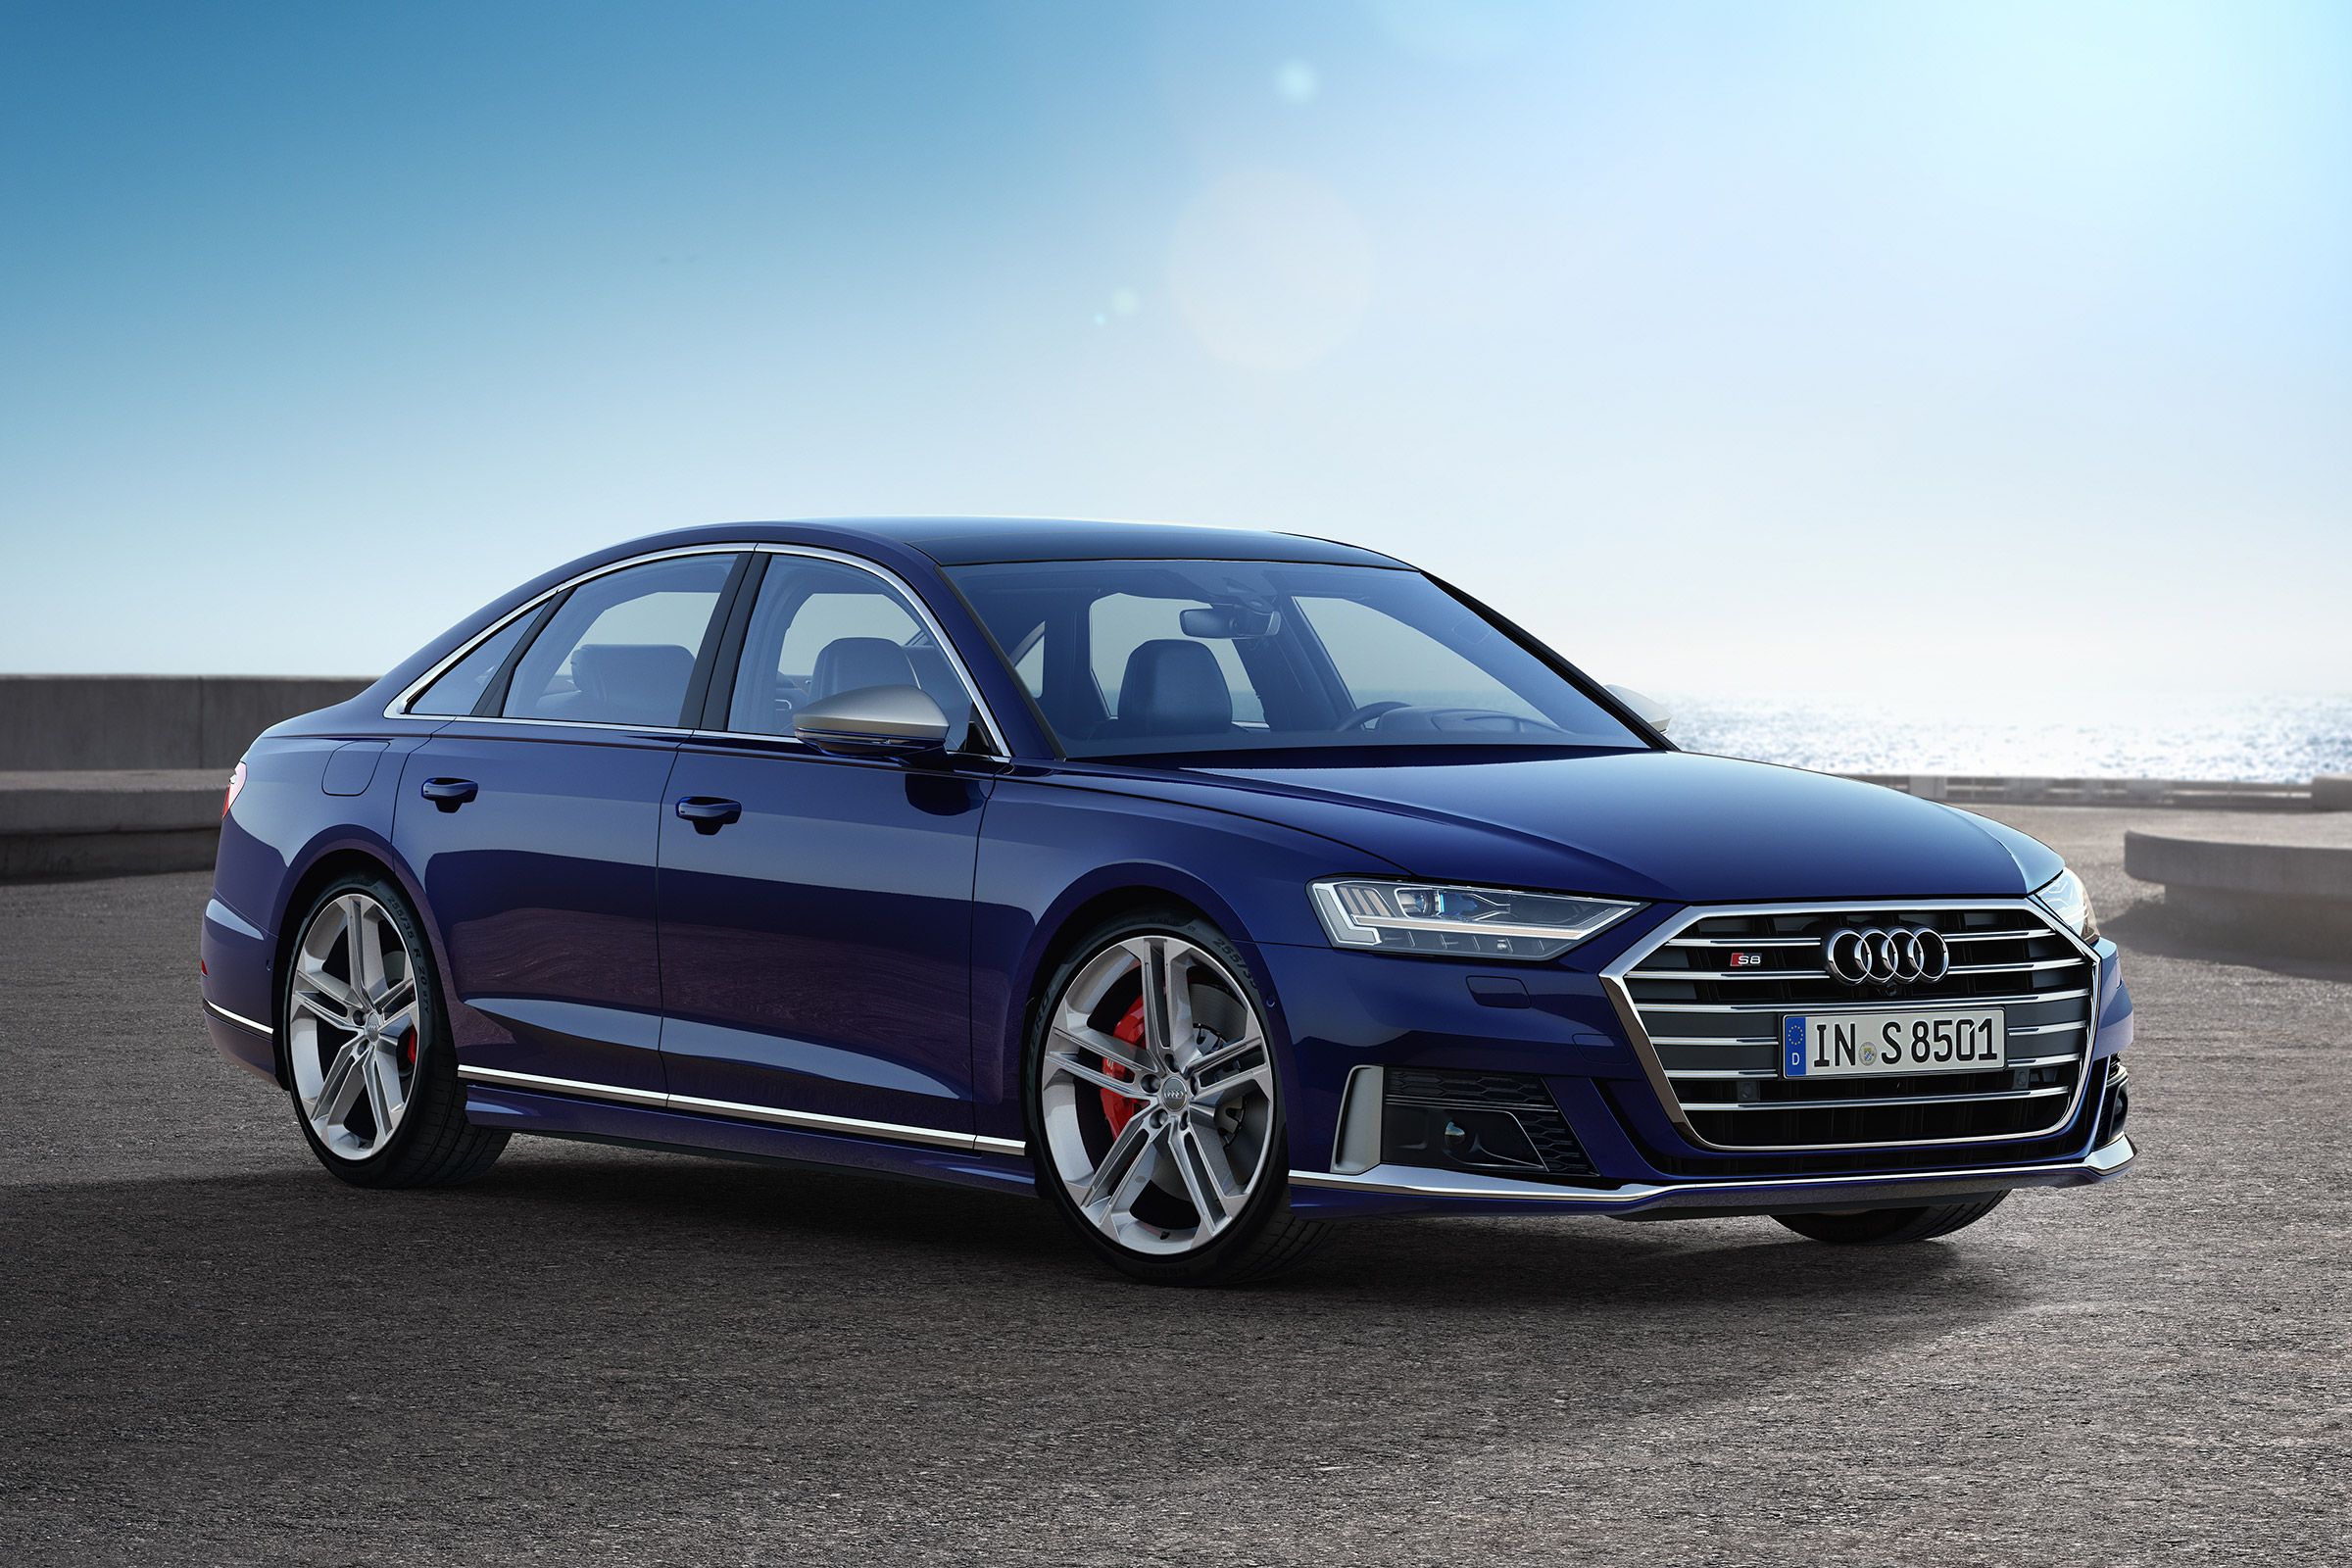 New flagship Audi S8 revealed with 563bhp Auto Express